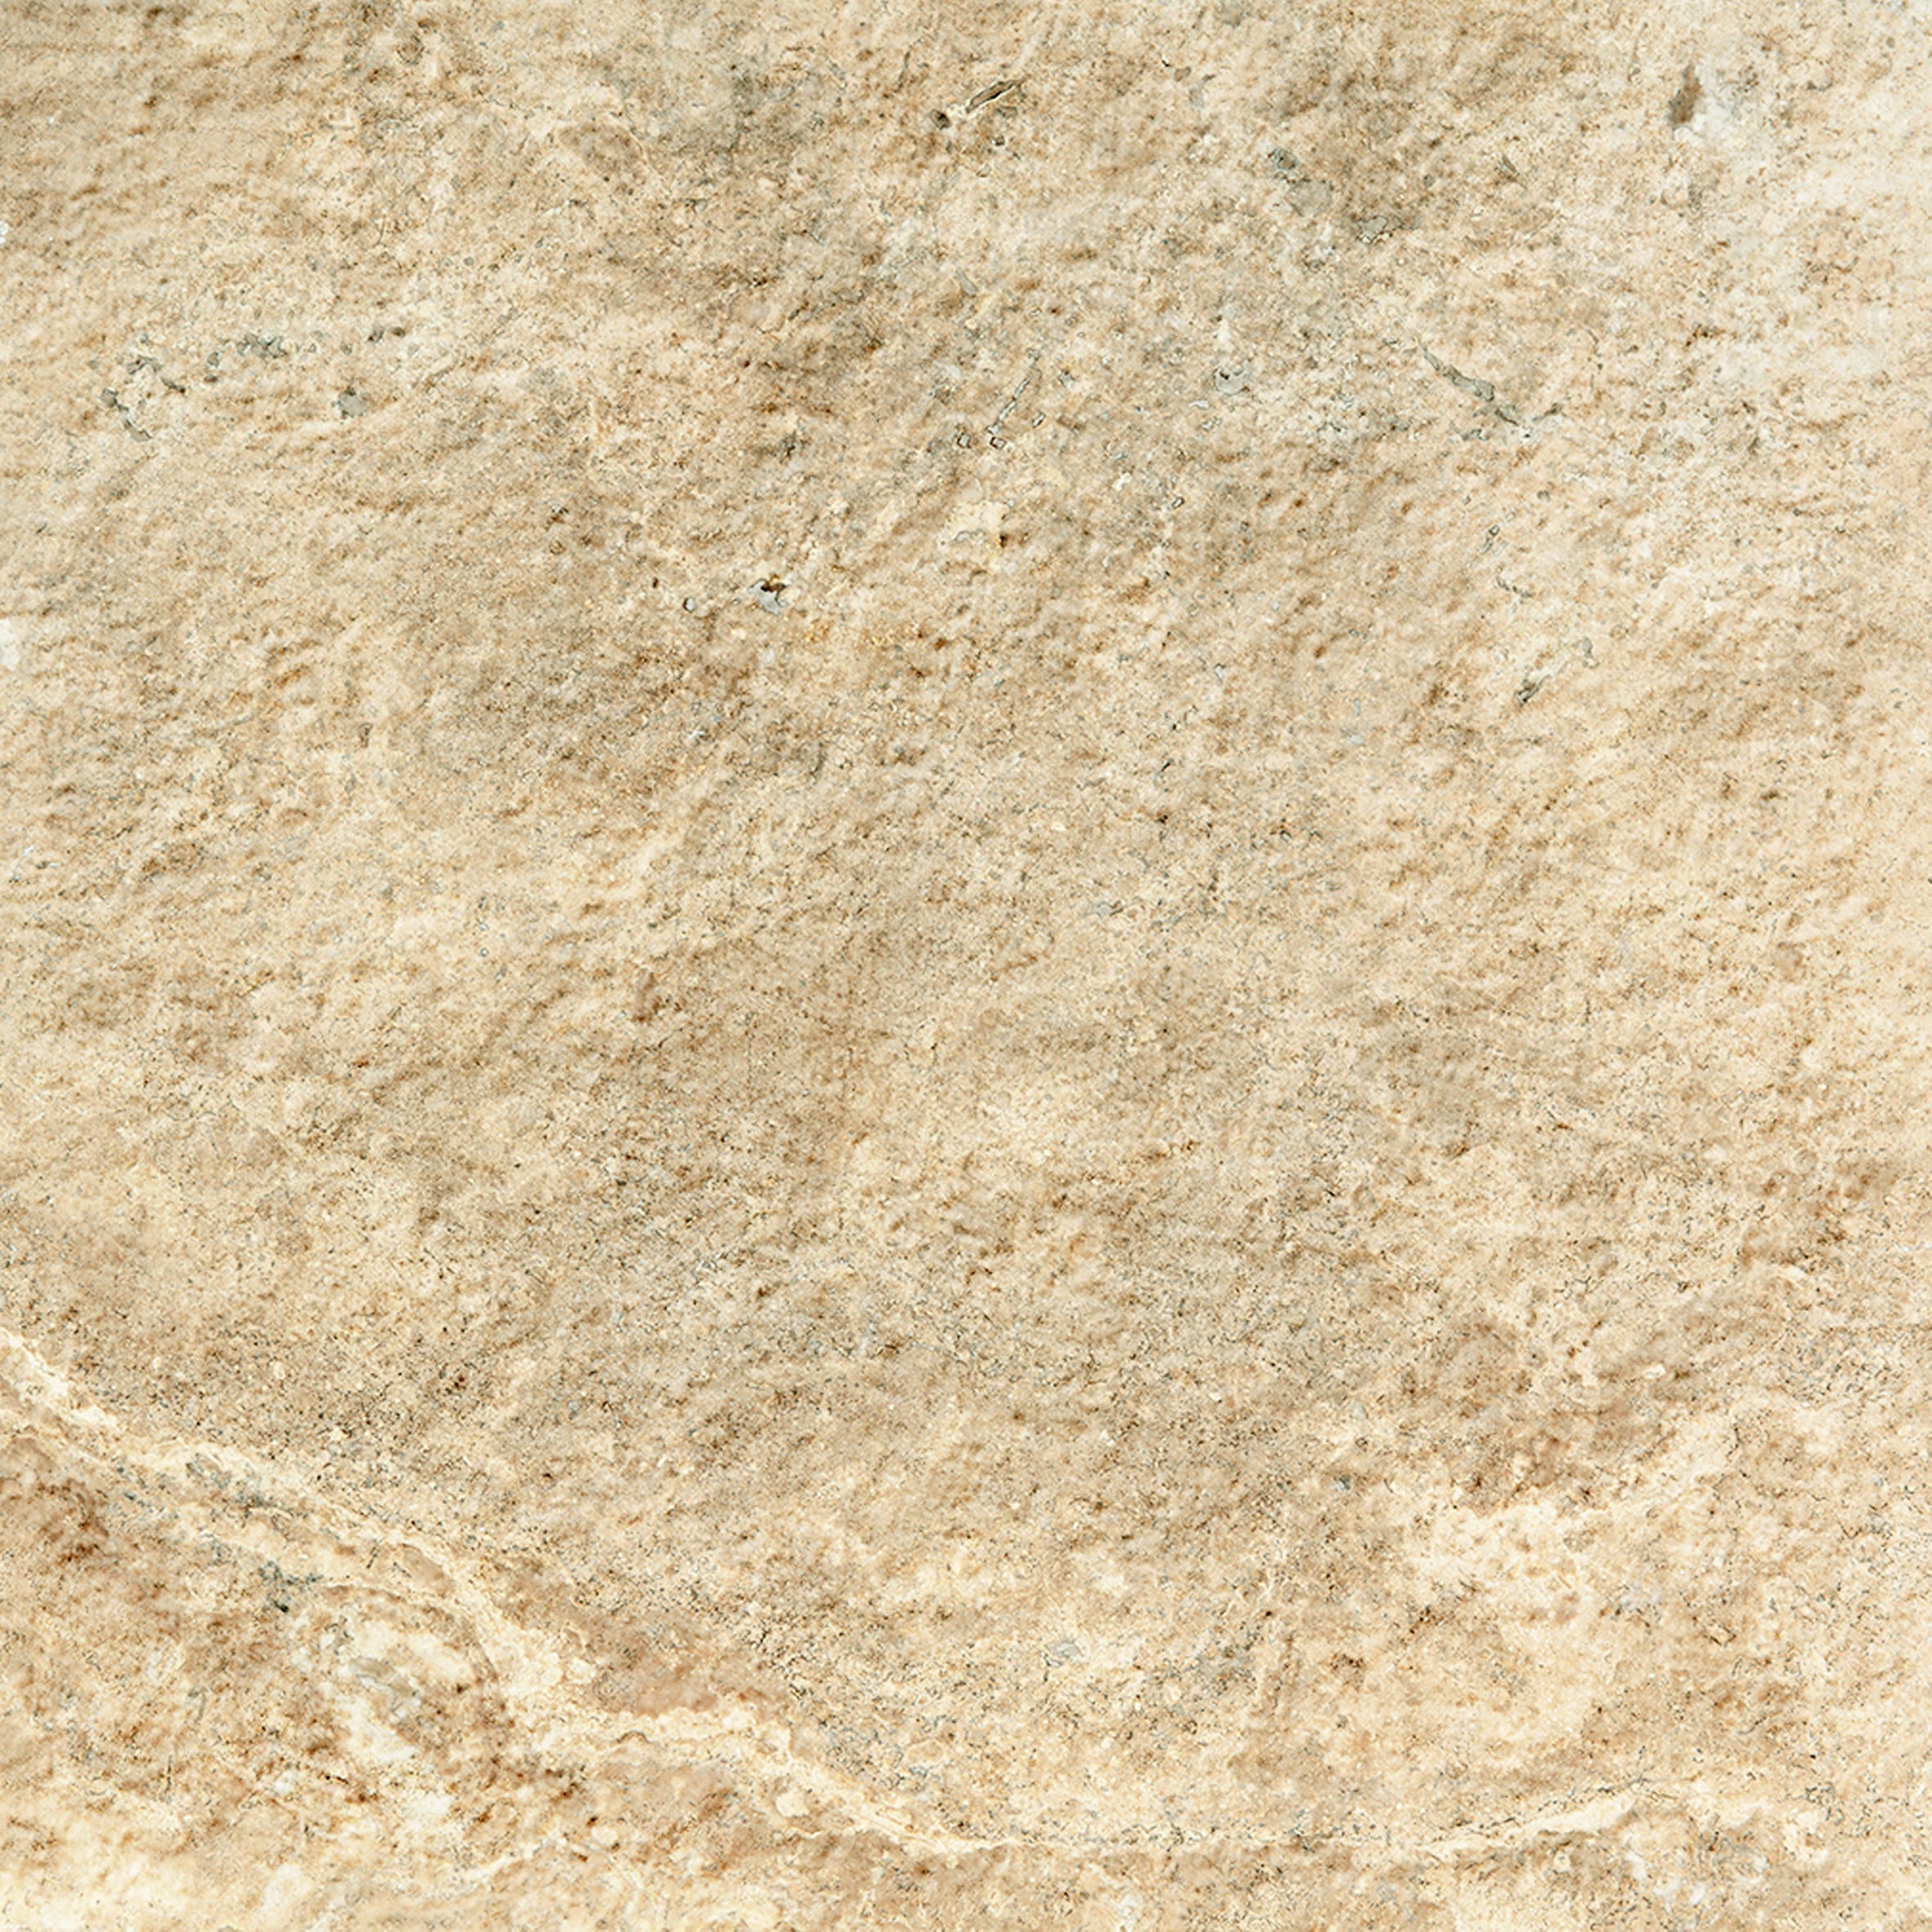 landmark frontier20 travertine cross cut cream paver tile 24x24x20mm matte rectified porcelain tile distributed by surface group international